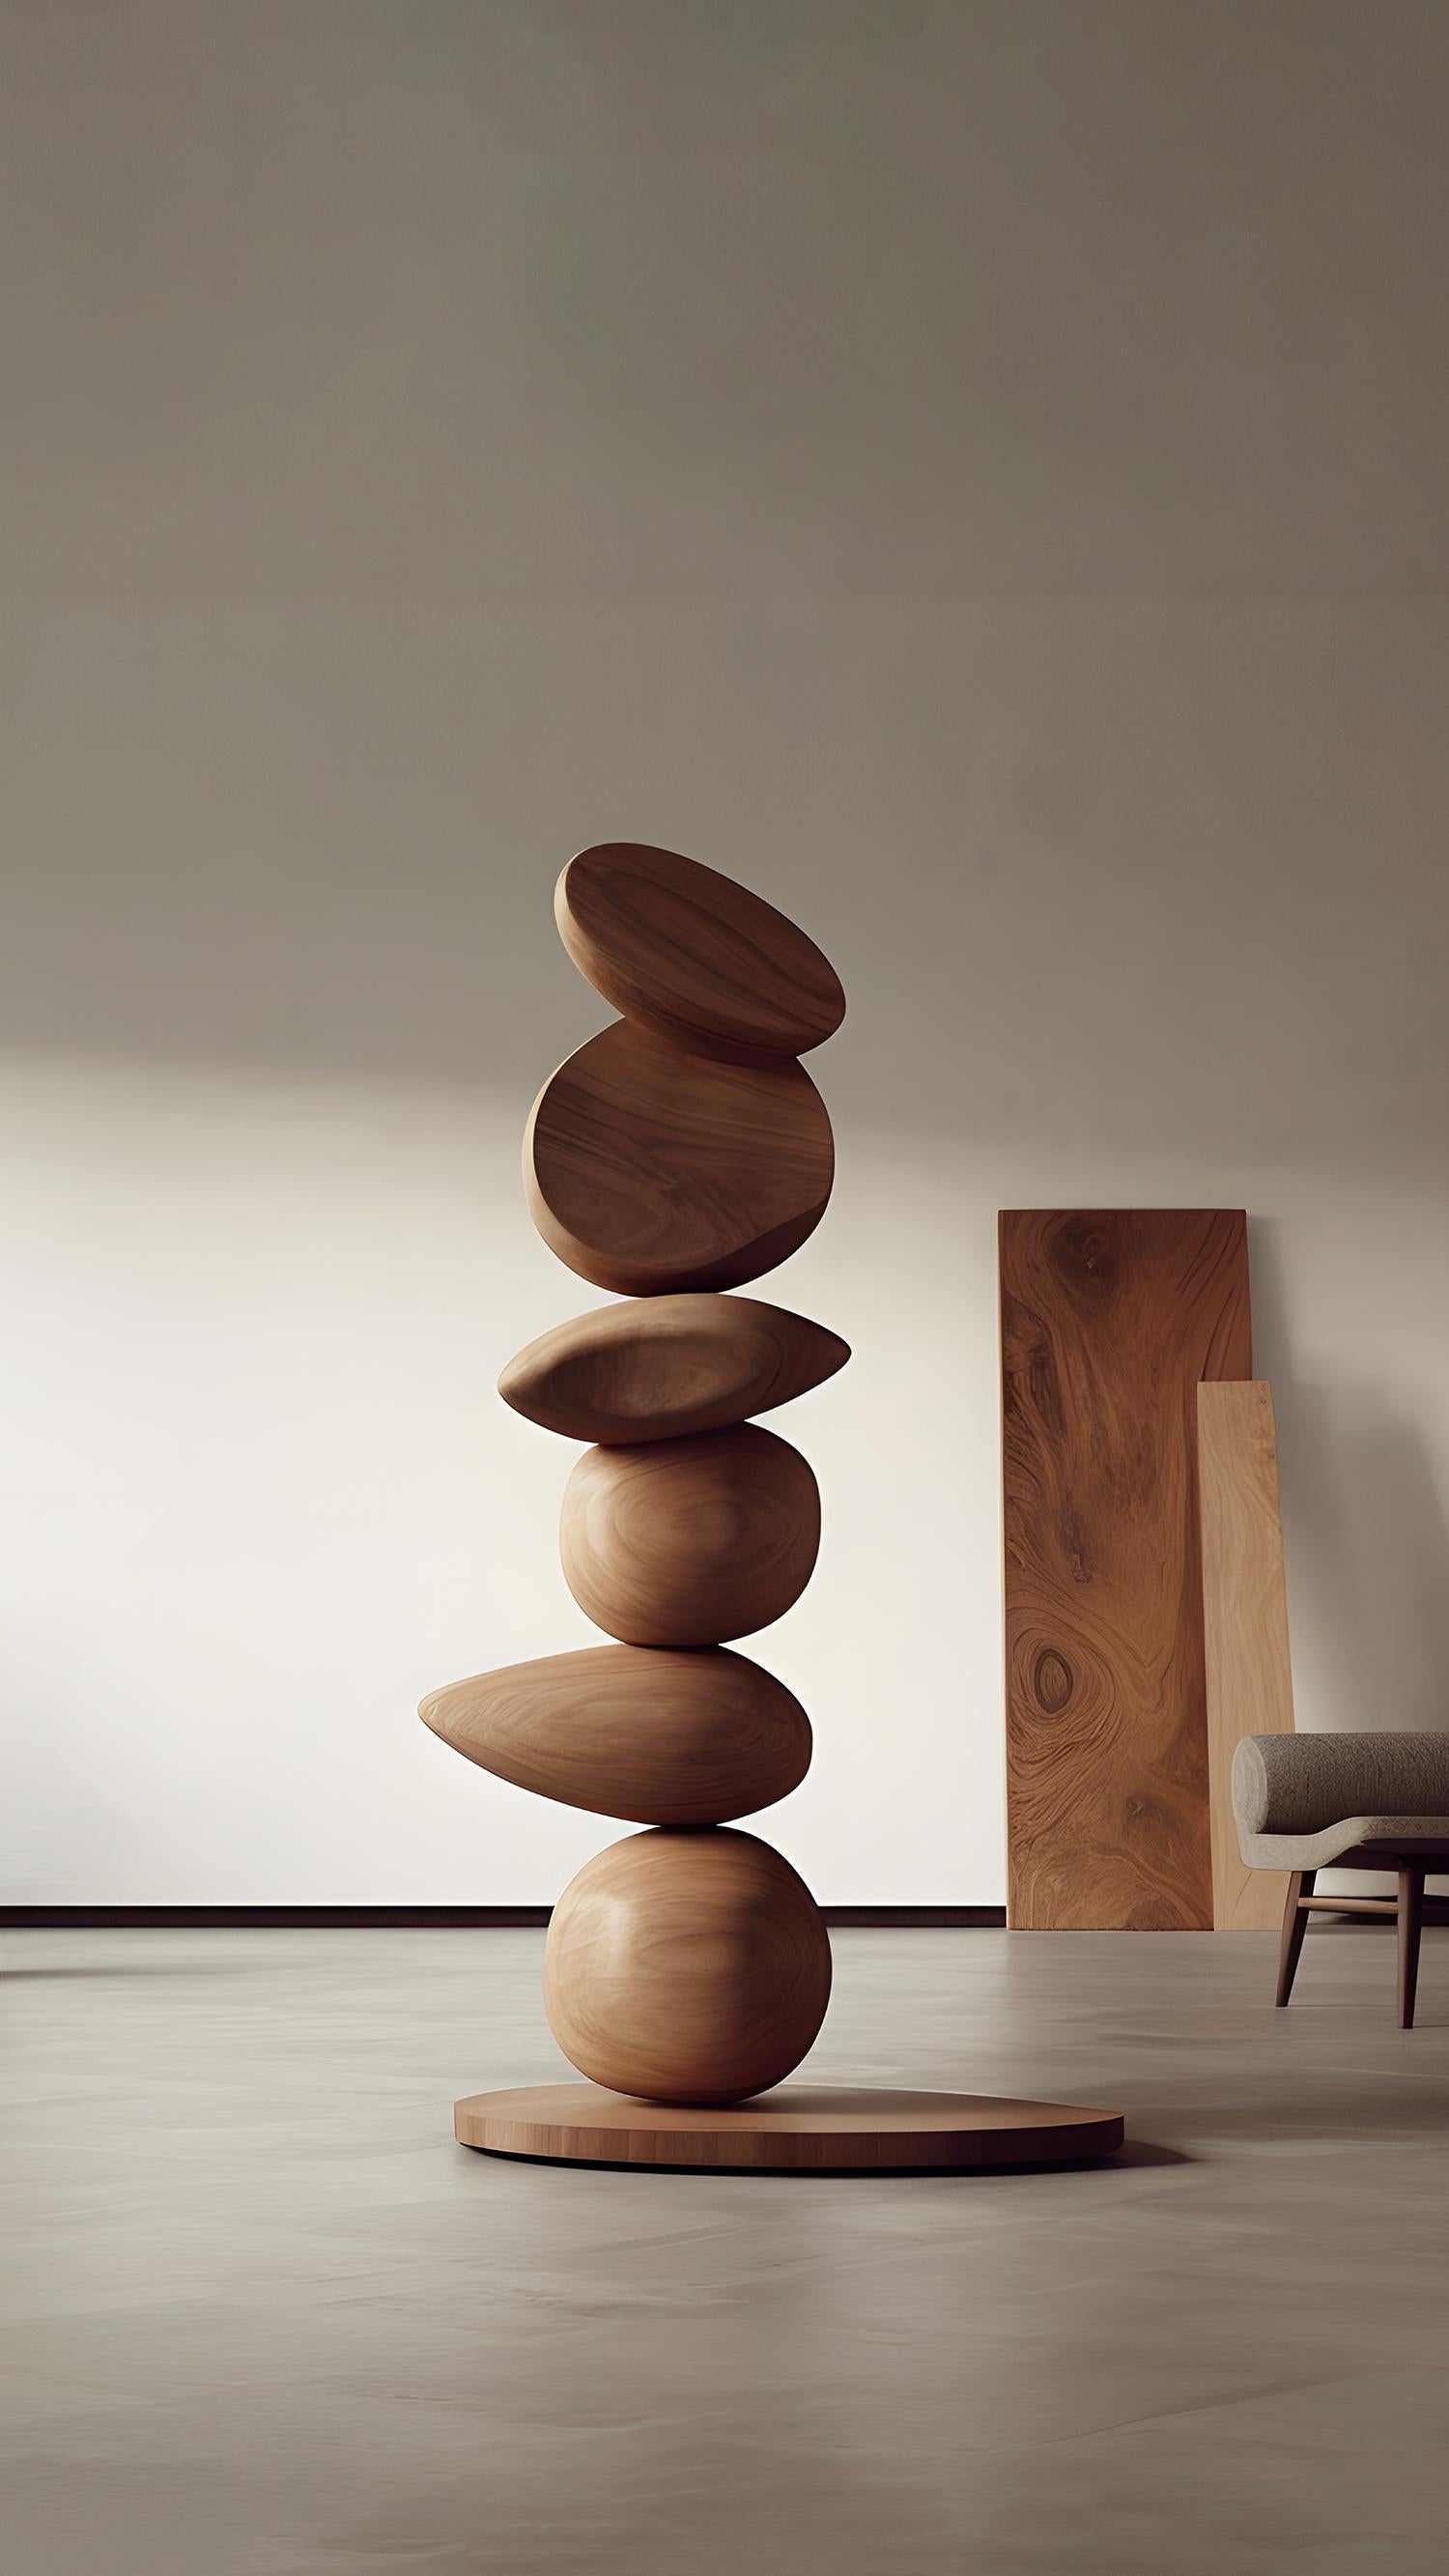 Hand-Crafted Still Stand No30: Sculptural Harmony, Tall Oak Totem by NONO, Escalona Design For Sale